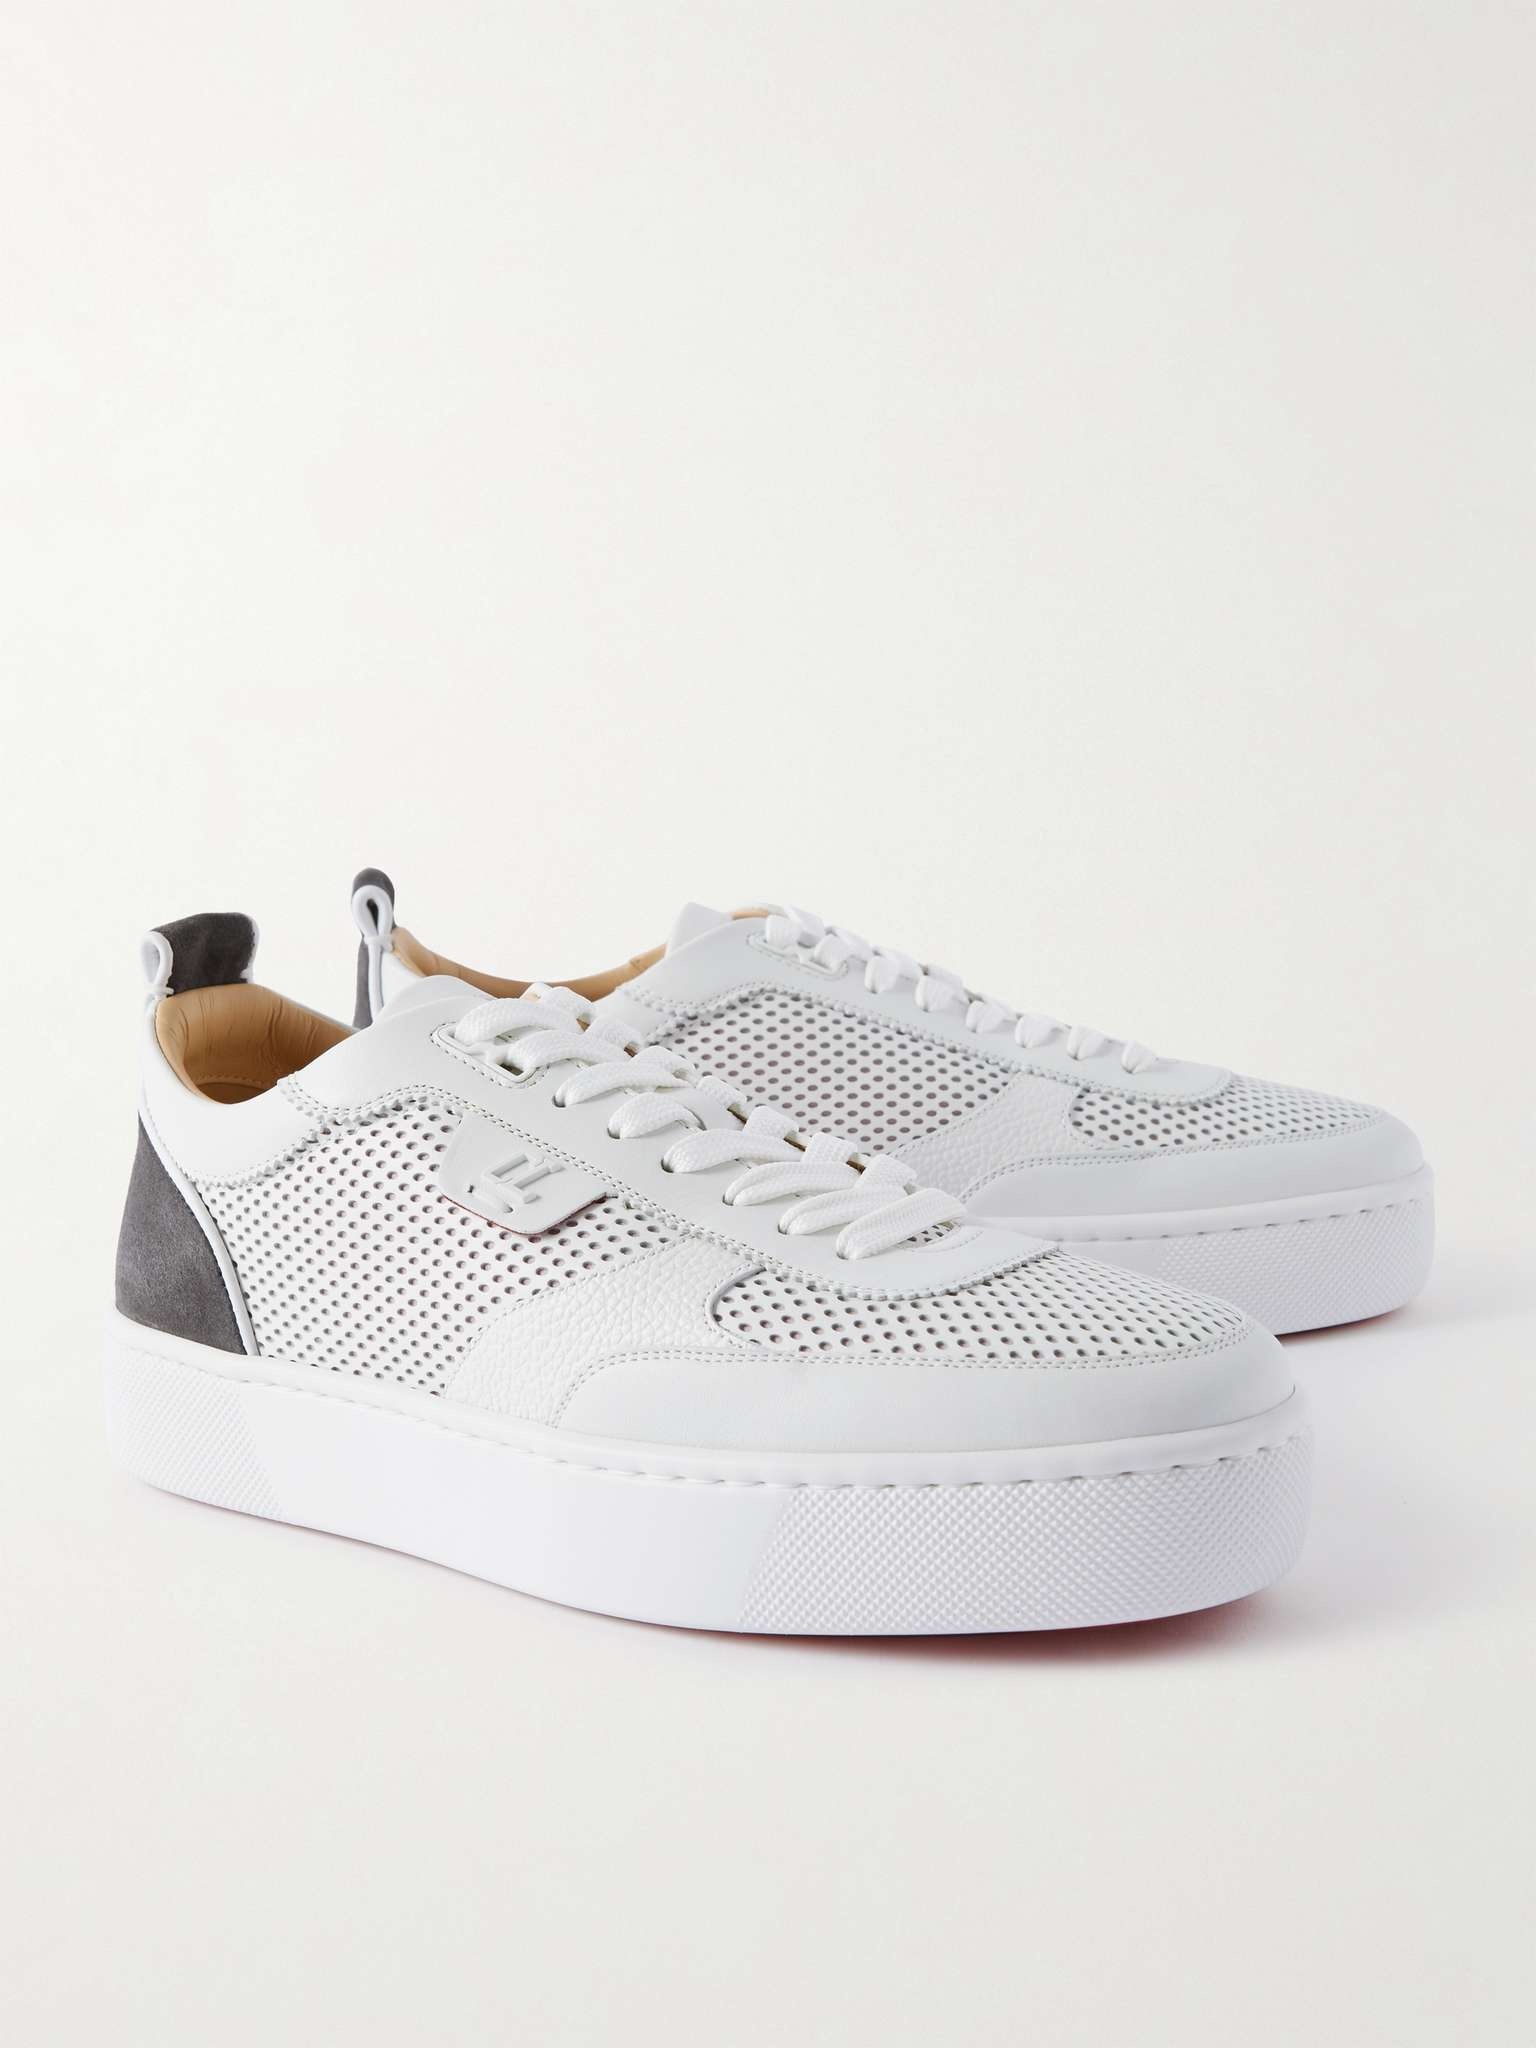 Happyrui Suede-Trimmed Perforated Leather Sneakers - 4